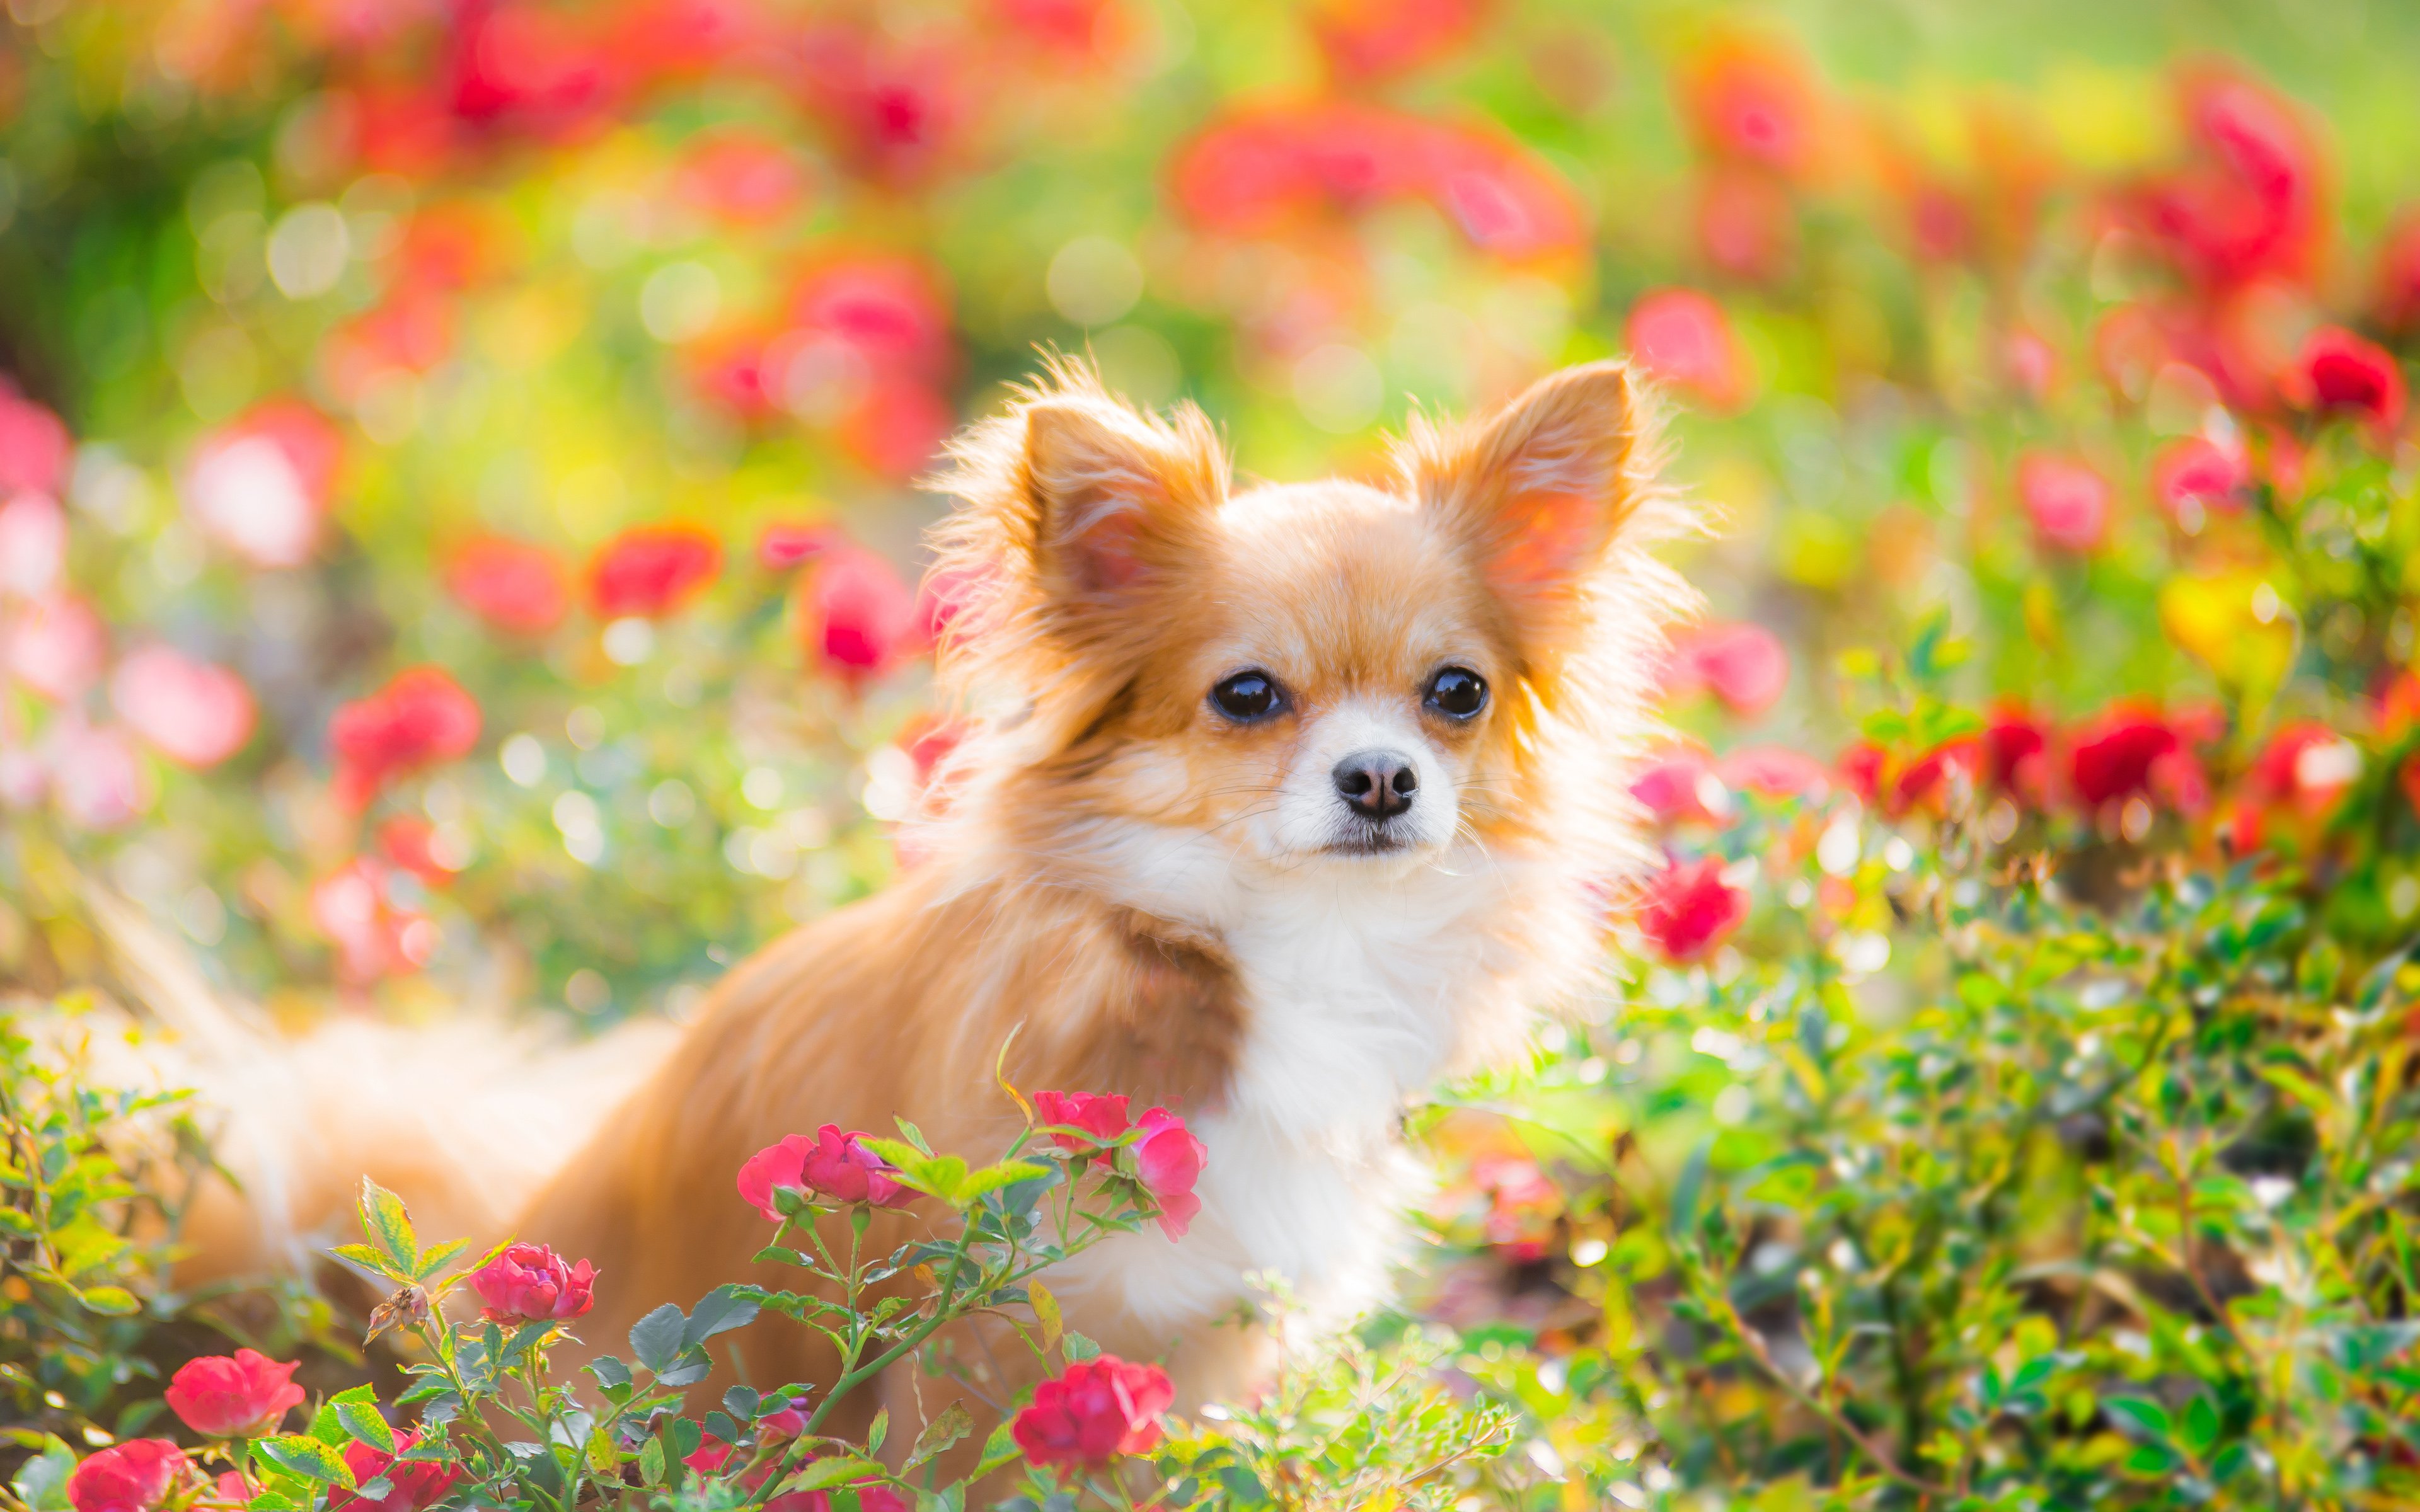 Download wallpapers Chihuahua, 4k, pets, dogs, flowers, cute animals